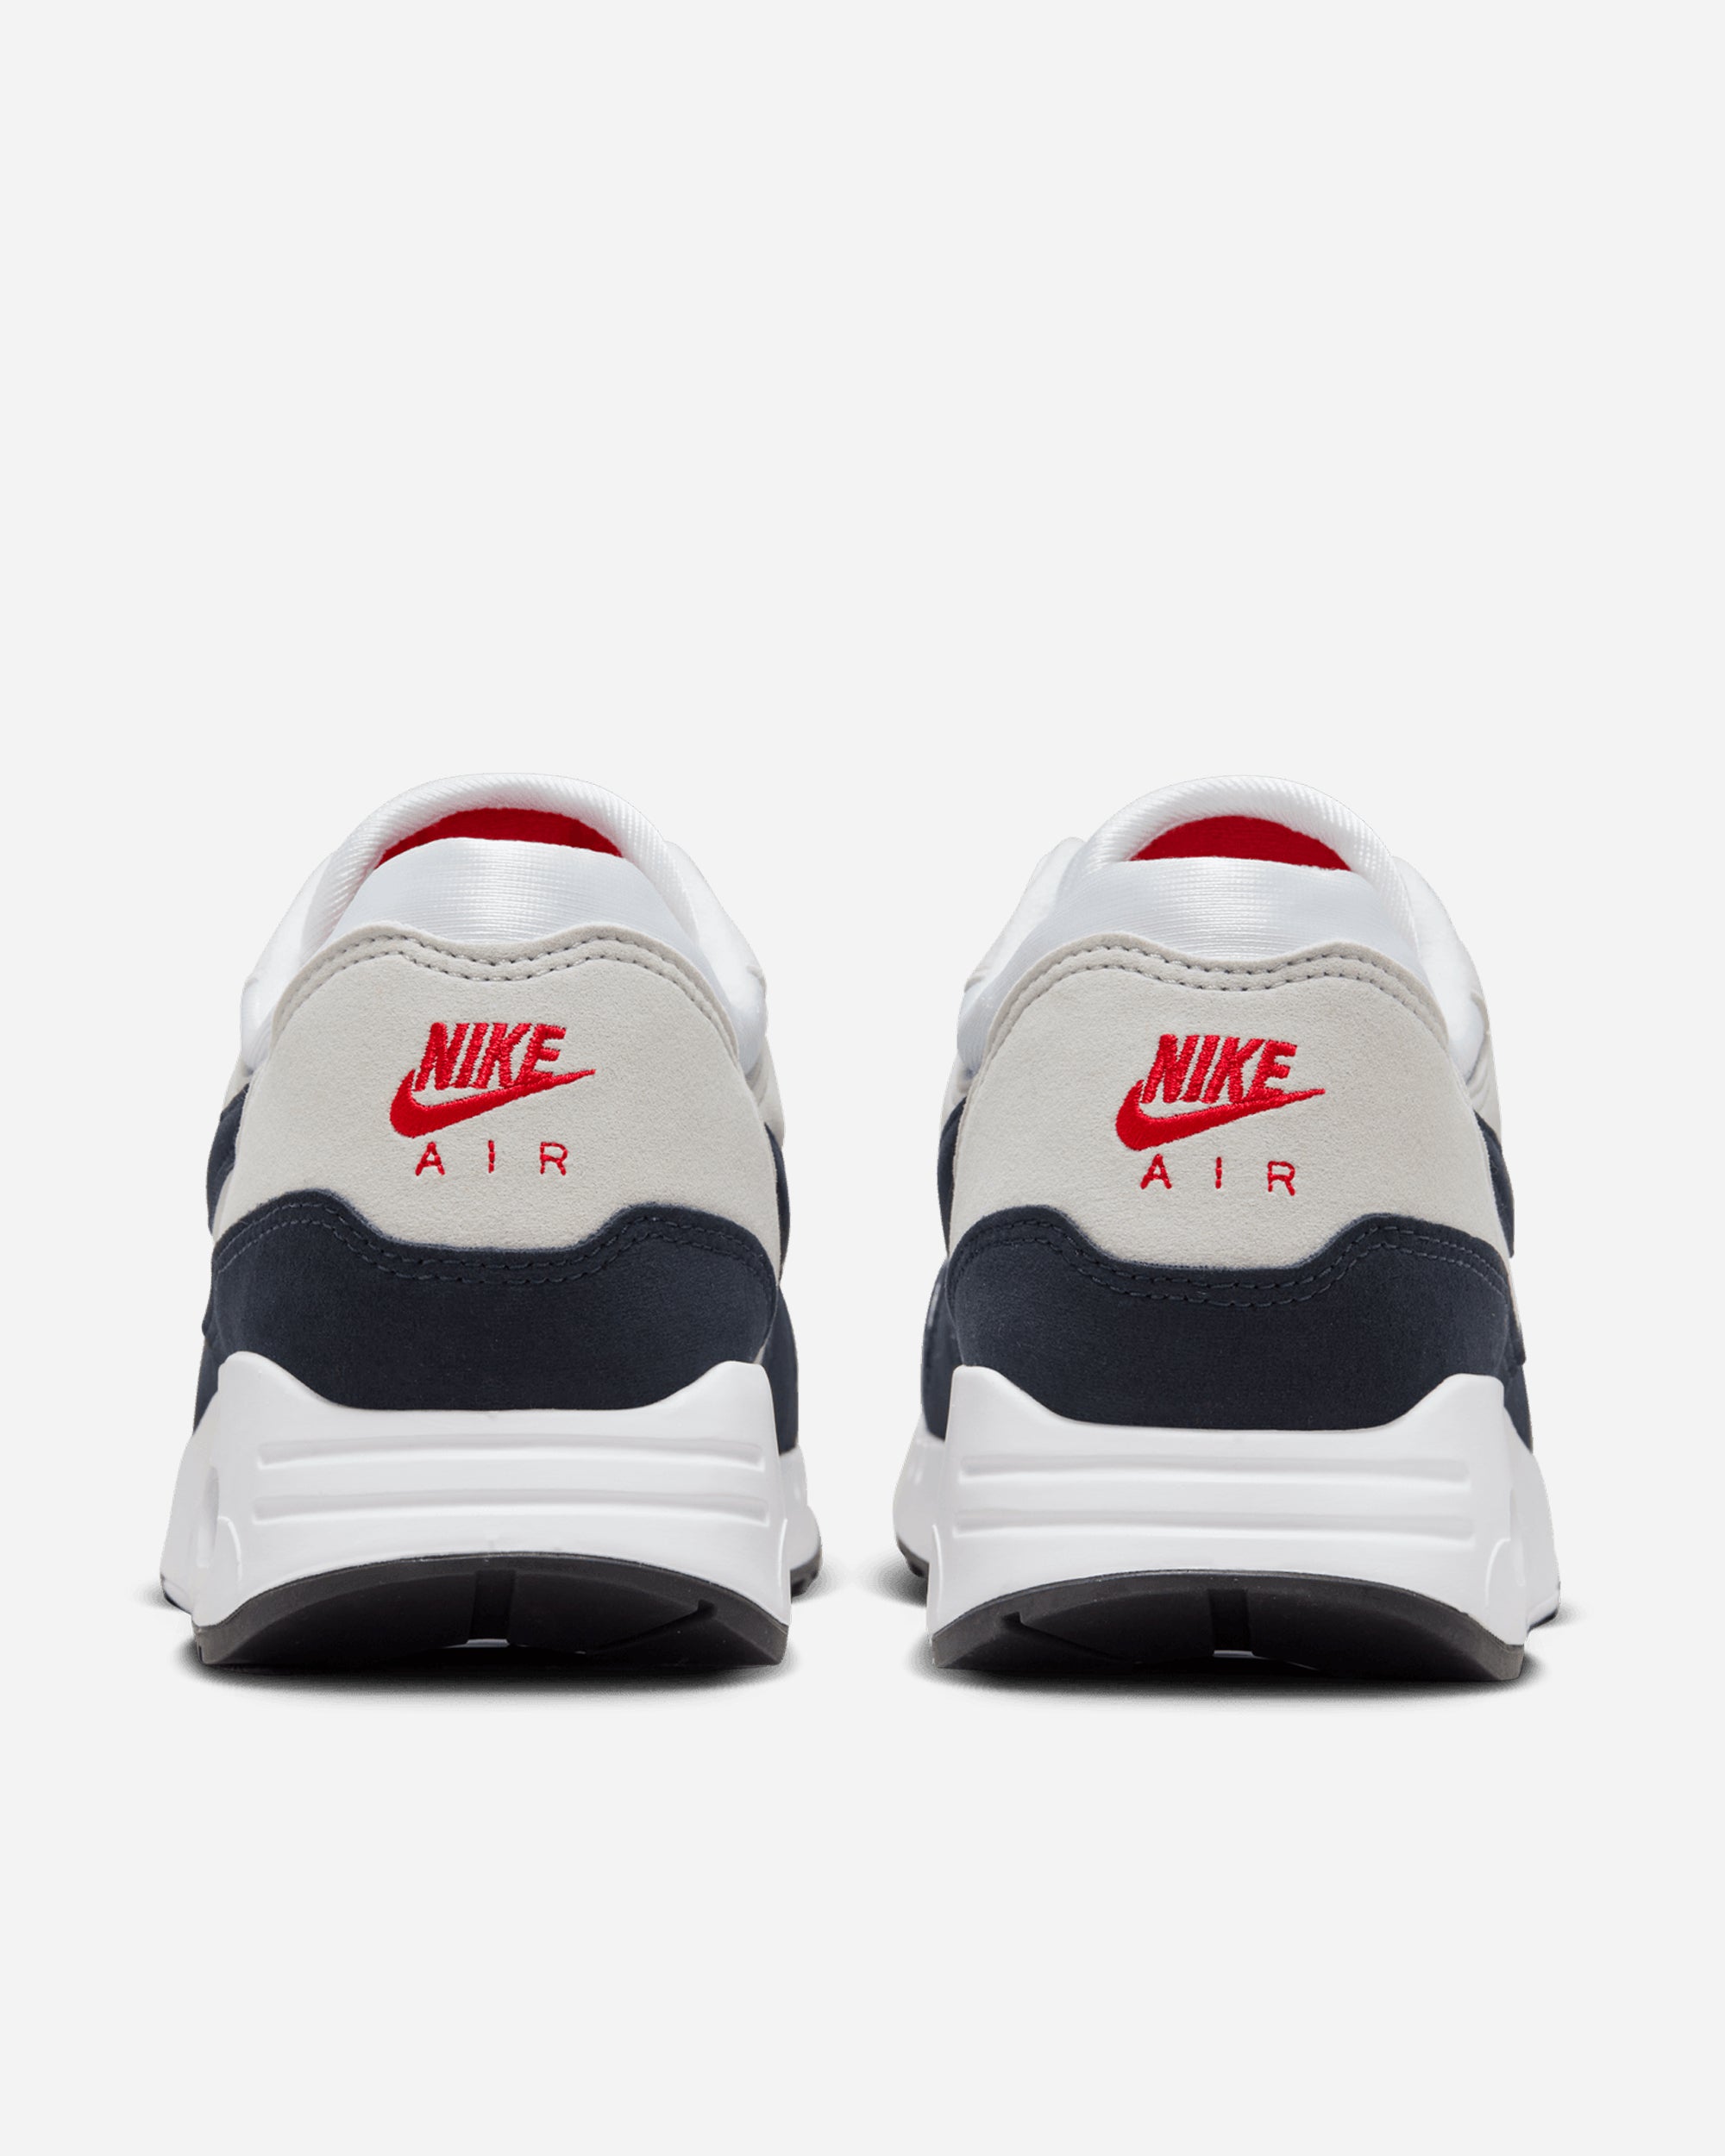 Nike Air Max 1'86 OG 'Big Bubble Sport Red' WHITE/OBSIDIAN-NEUTRAL GREY DQ3989-101